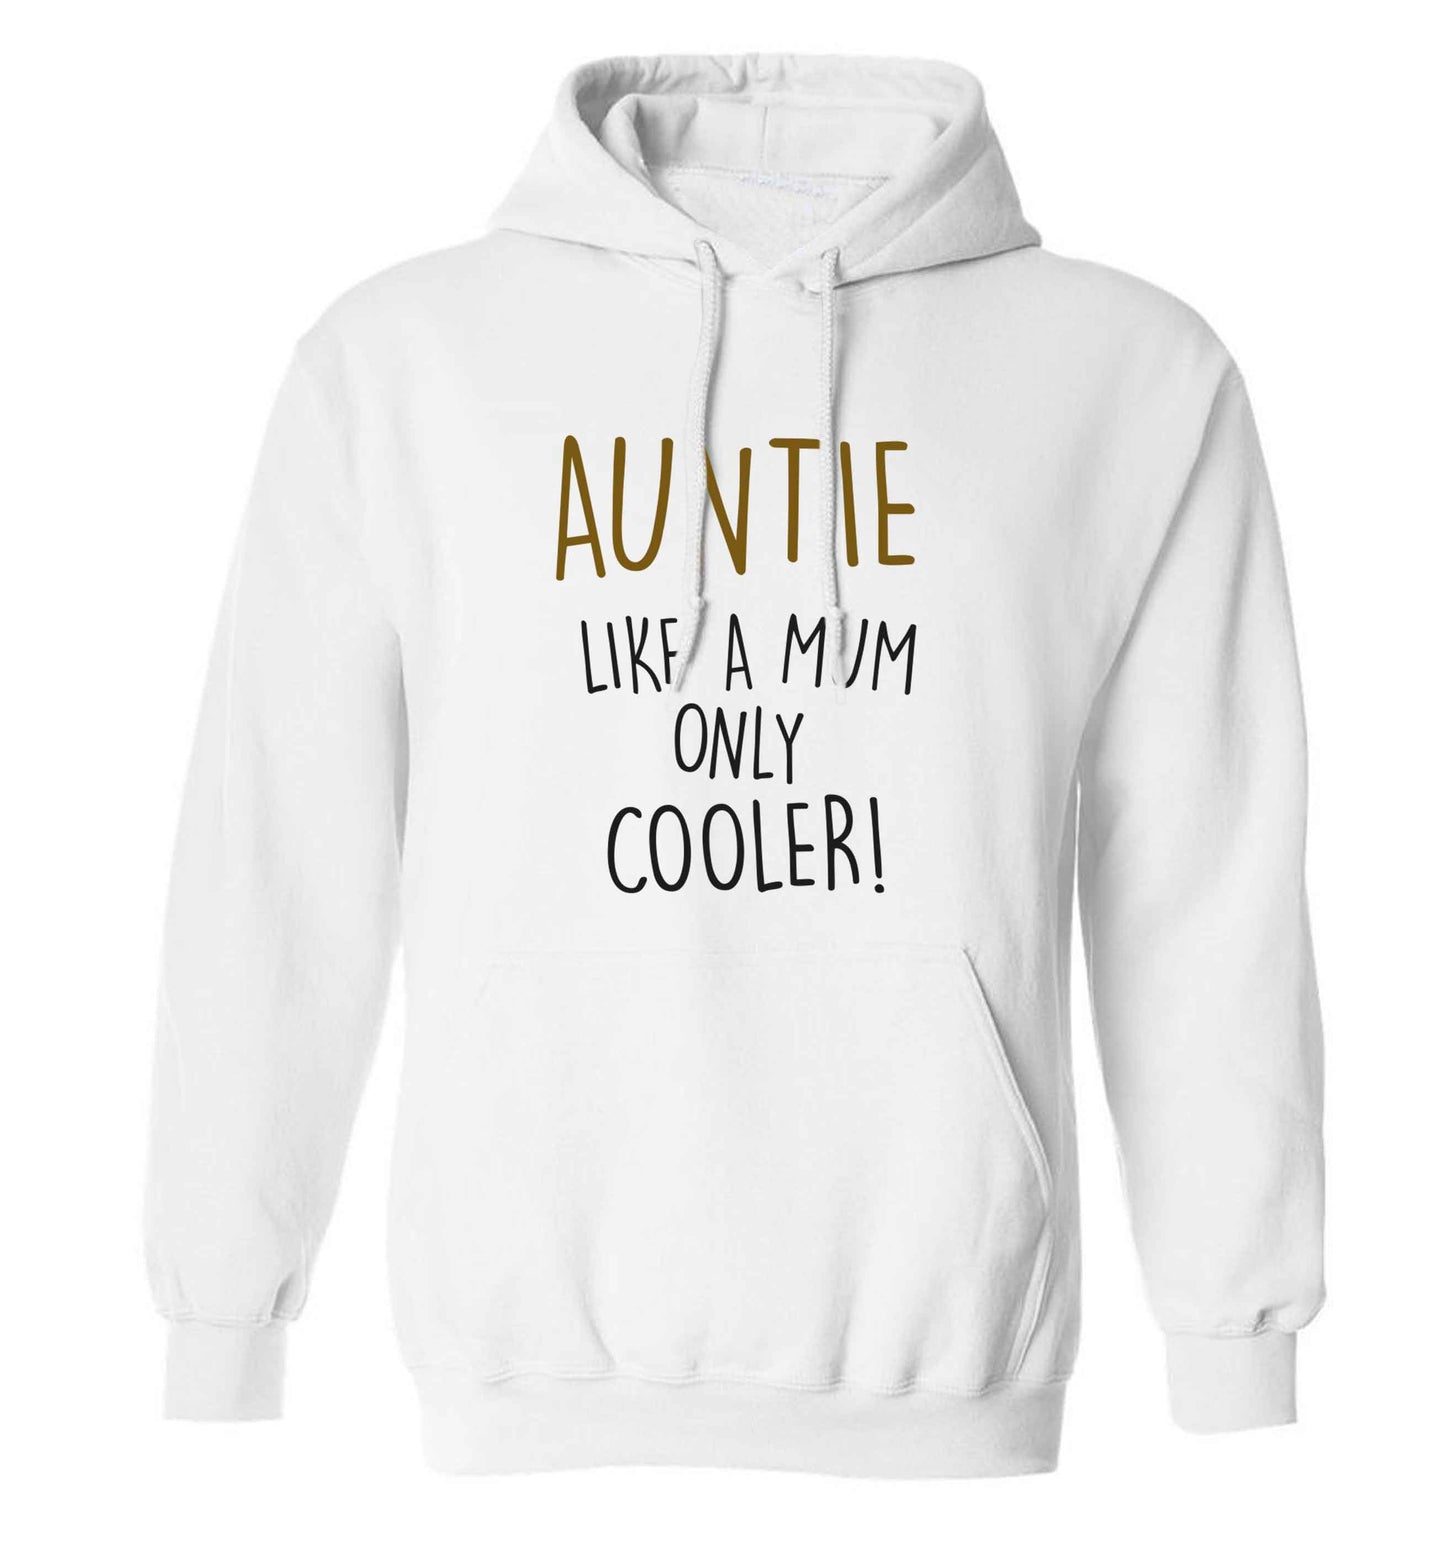 Auntie like a mum only cooler adults unisex white hoodie 2XL